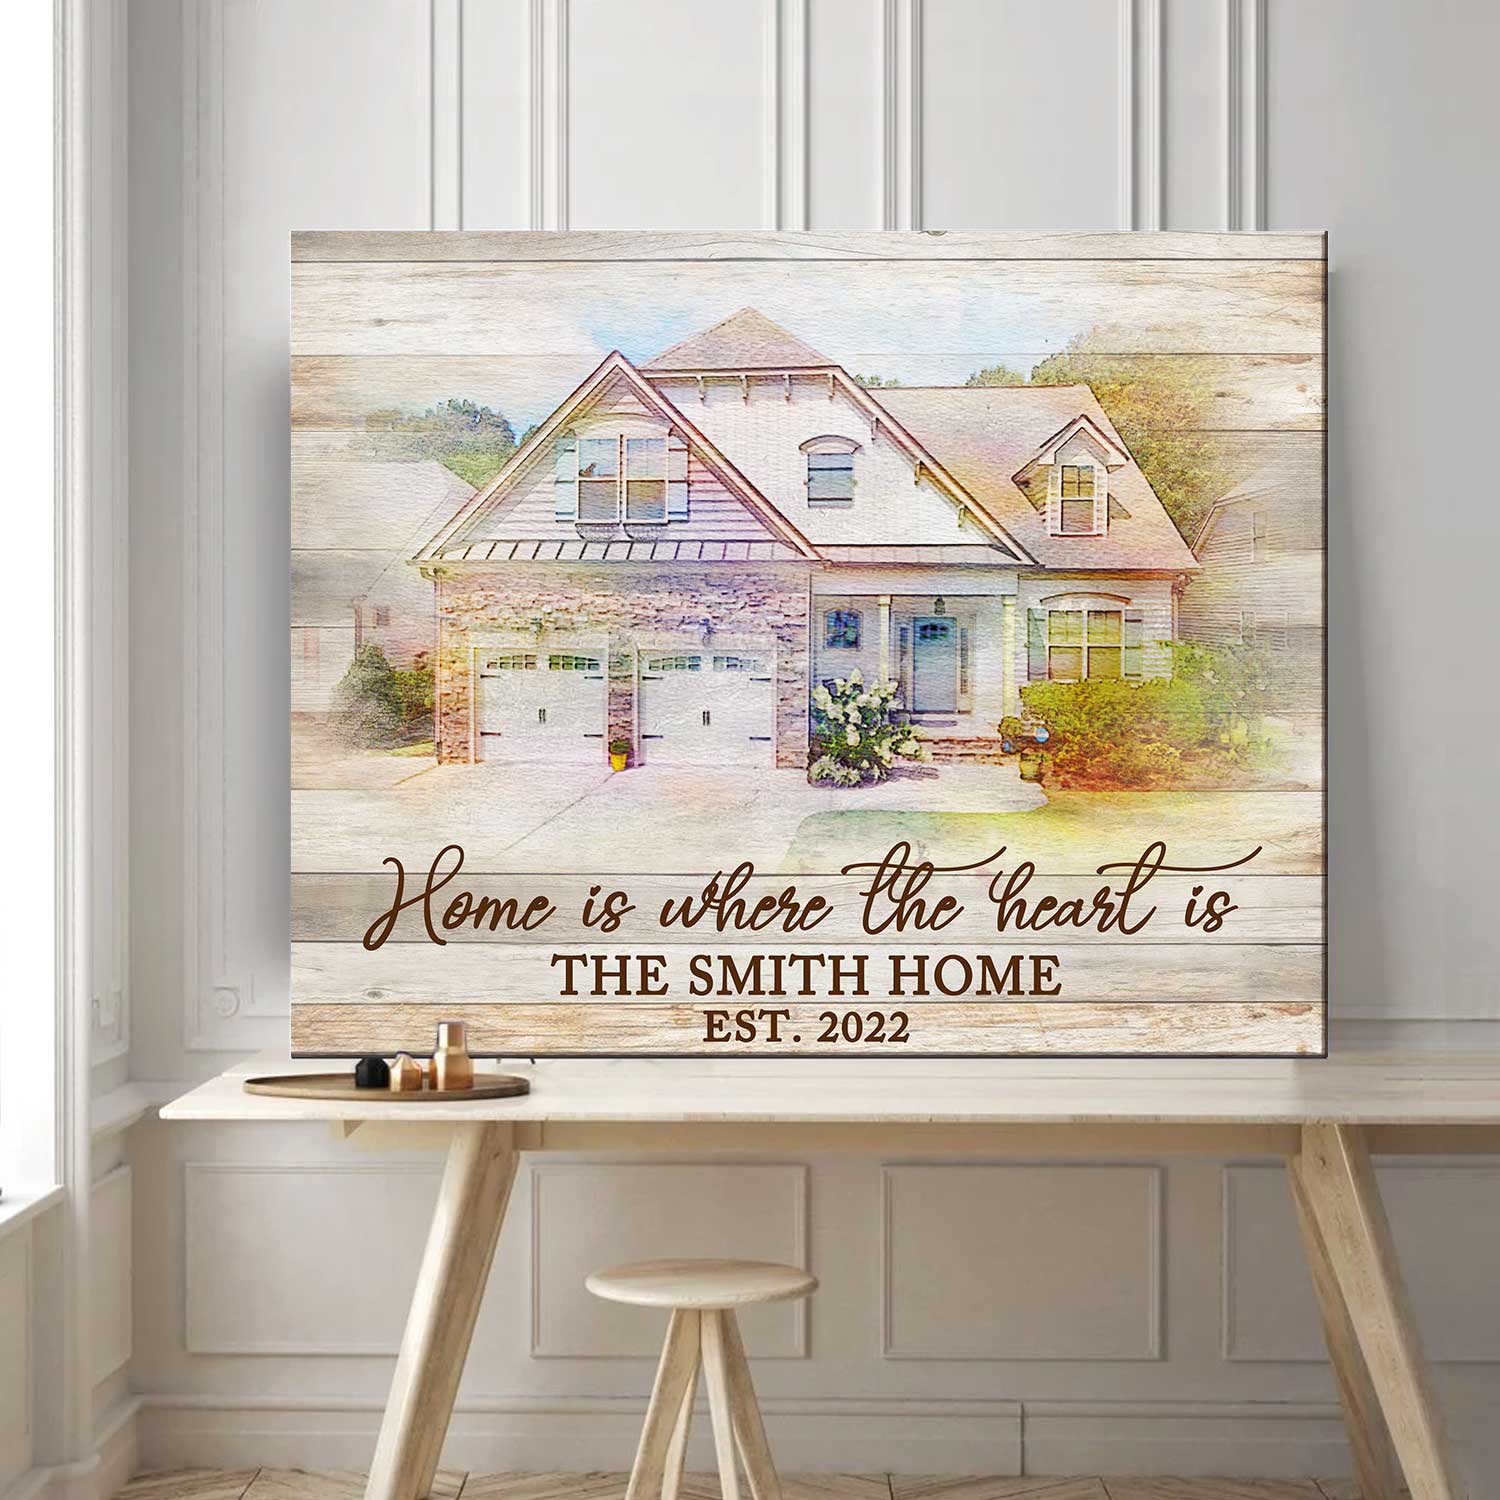 House Warming Decor | Personalized Housewarming Gifts | Lime & Lou